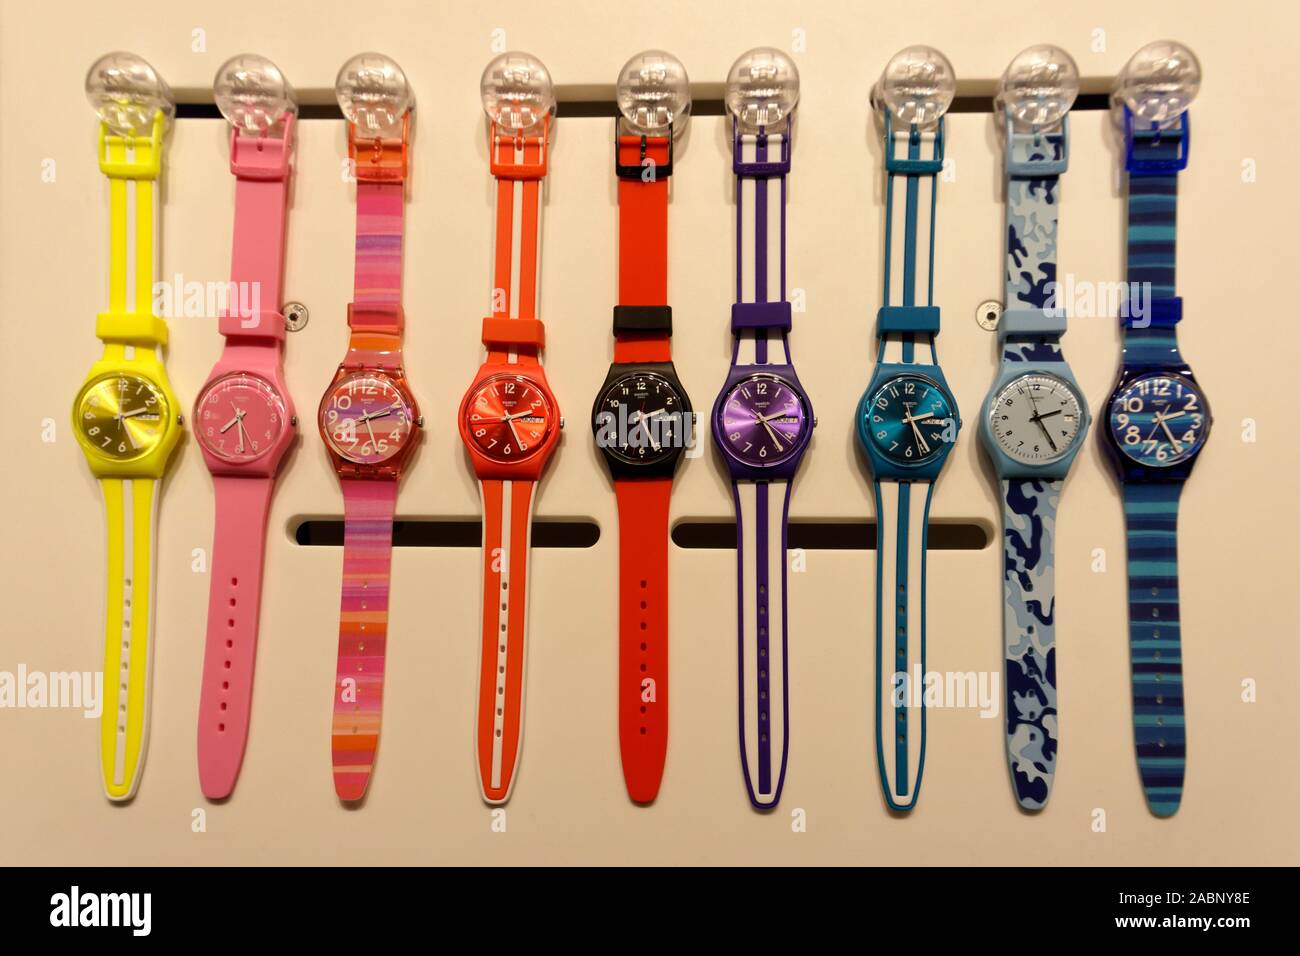 Swatch Watches for Med